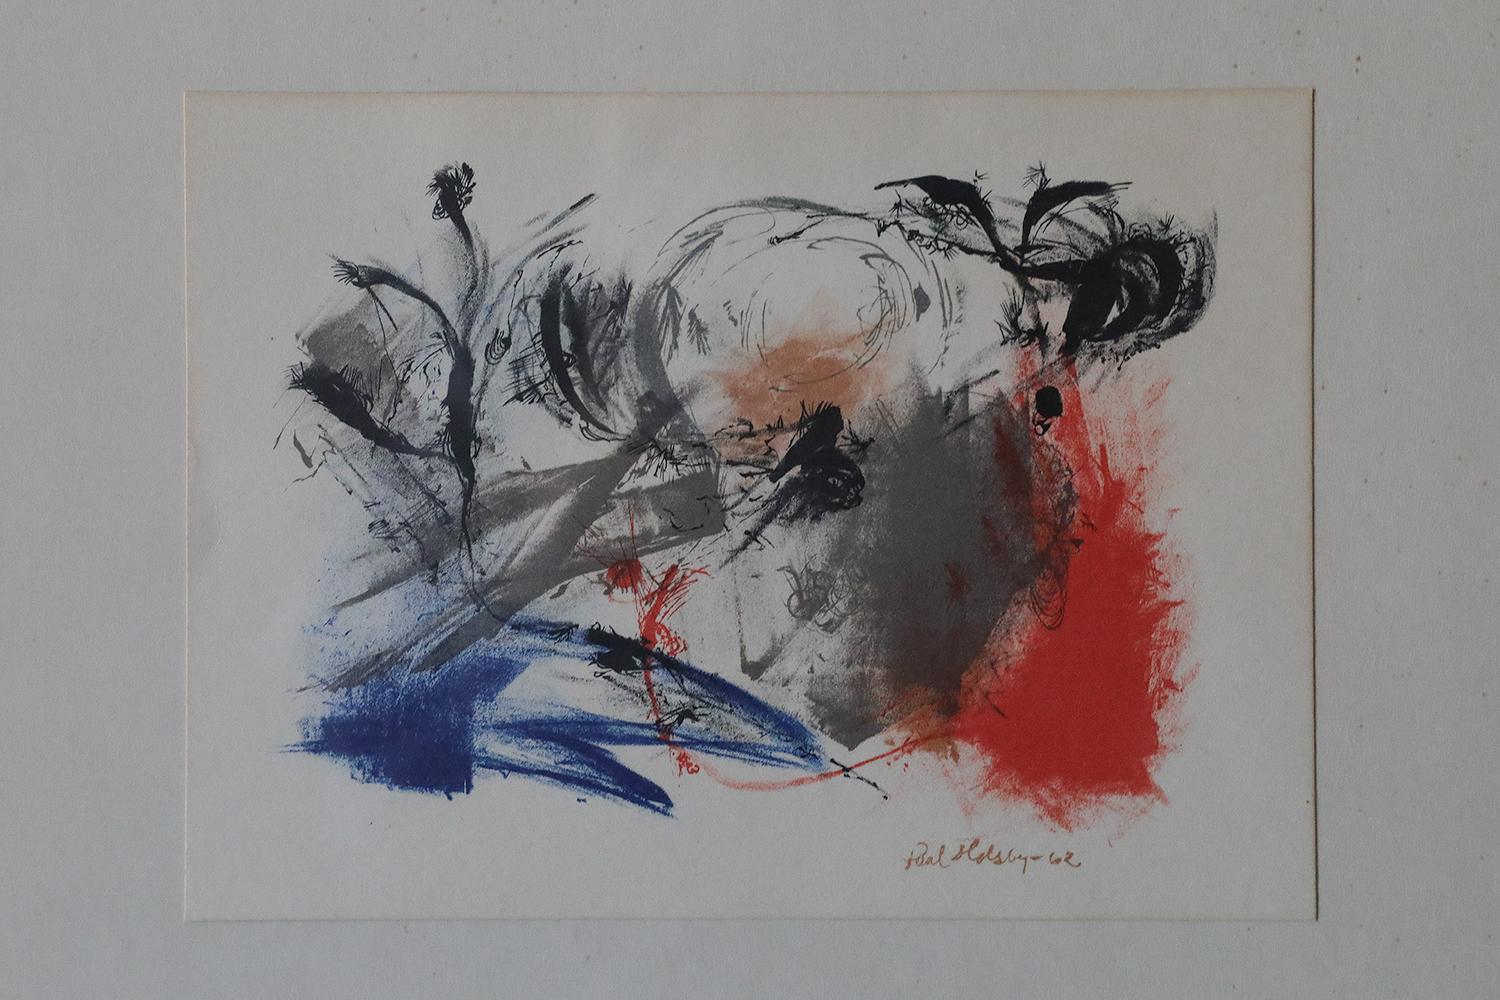 Paul Holsby, 1962
Color lithograph
The work is signed by the artist and dated (pencil)
Work dimensions 26/30
The work is framed

Paul Holsby was born in 1921 in Norrtälje, died in 2007 in Höganäs. He was Swedish and a graphic designer. He studied